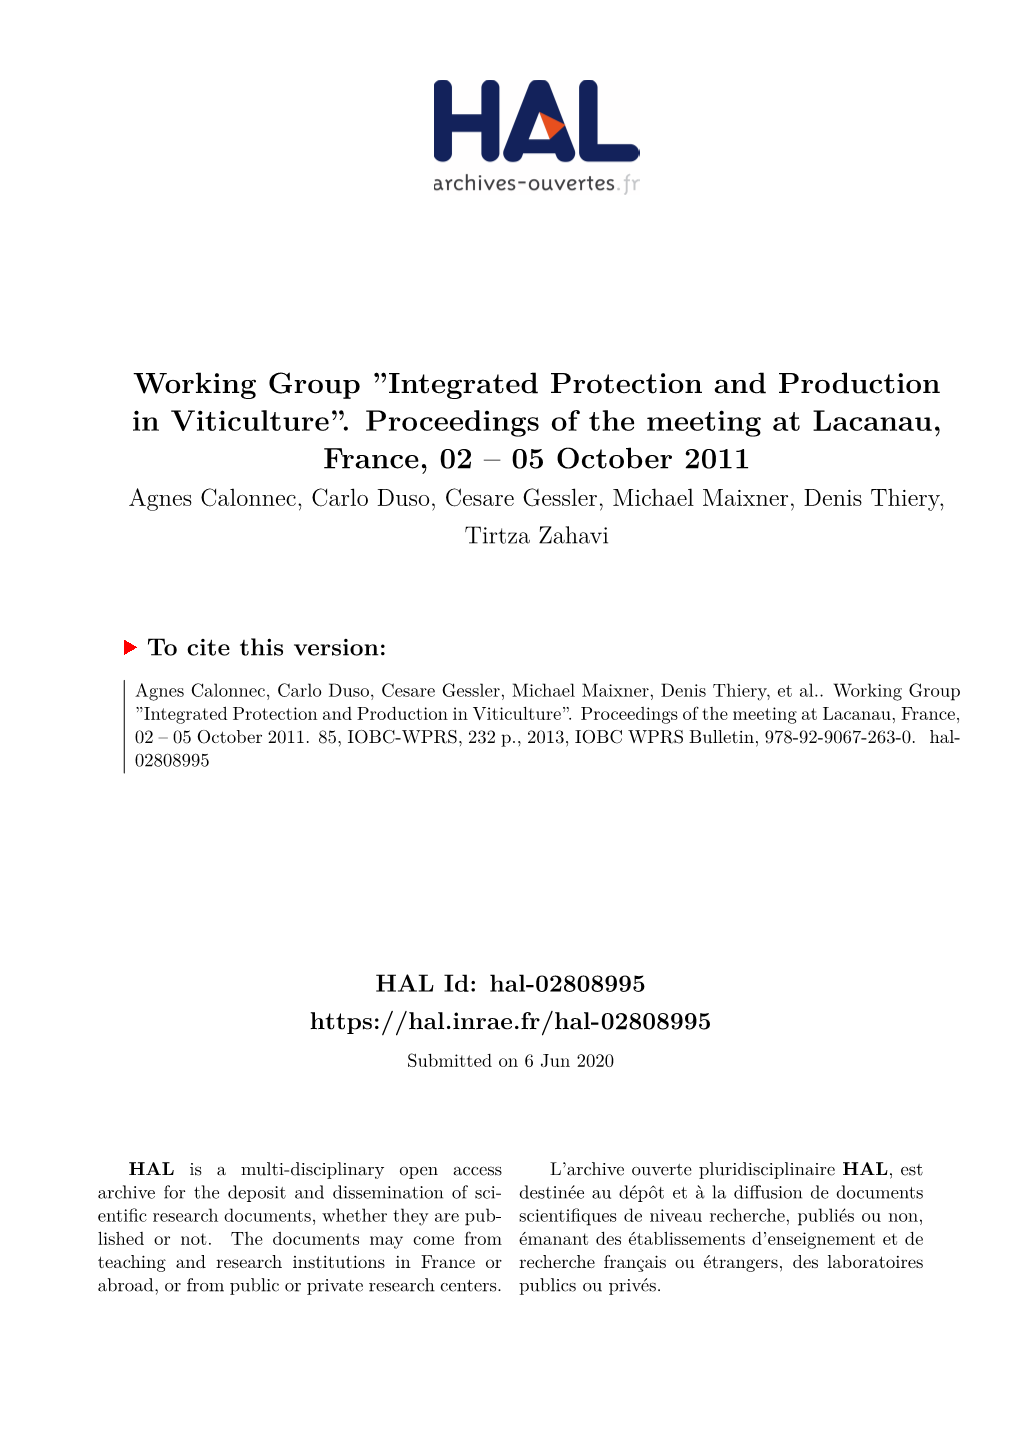 Integrated Protection and Production in Viticulture”